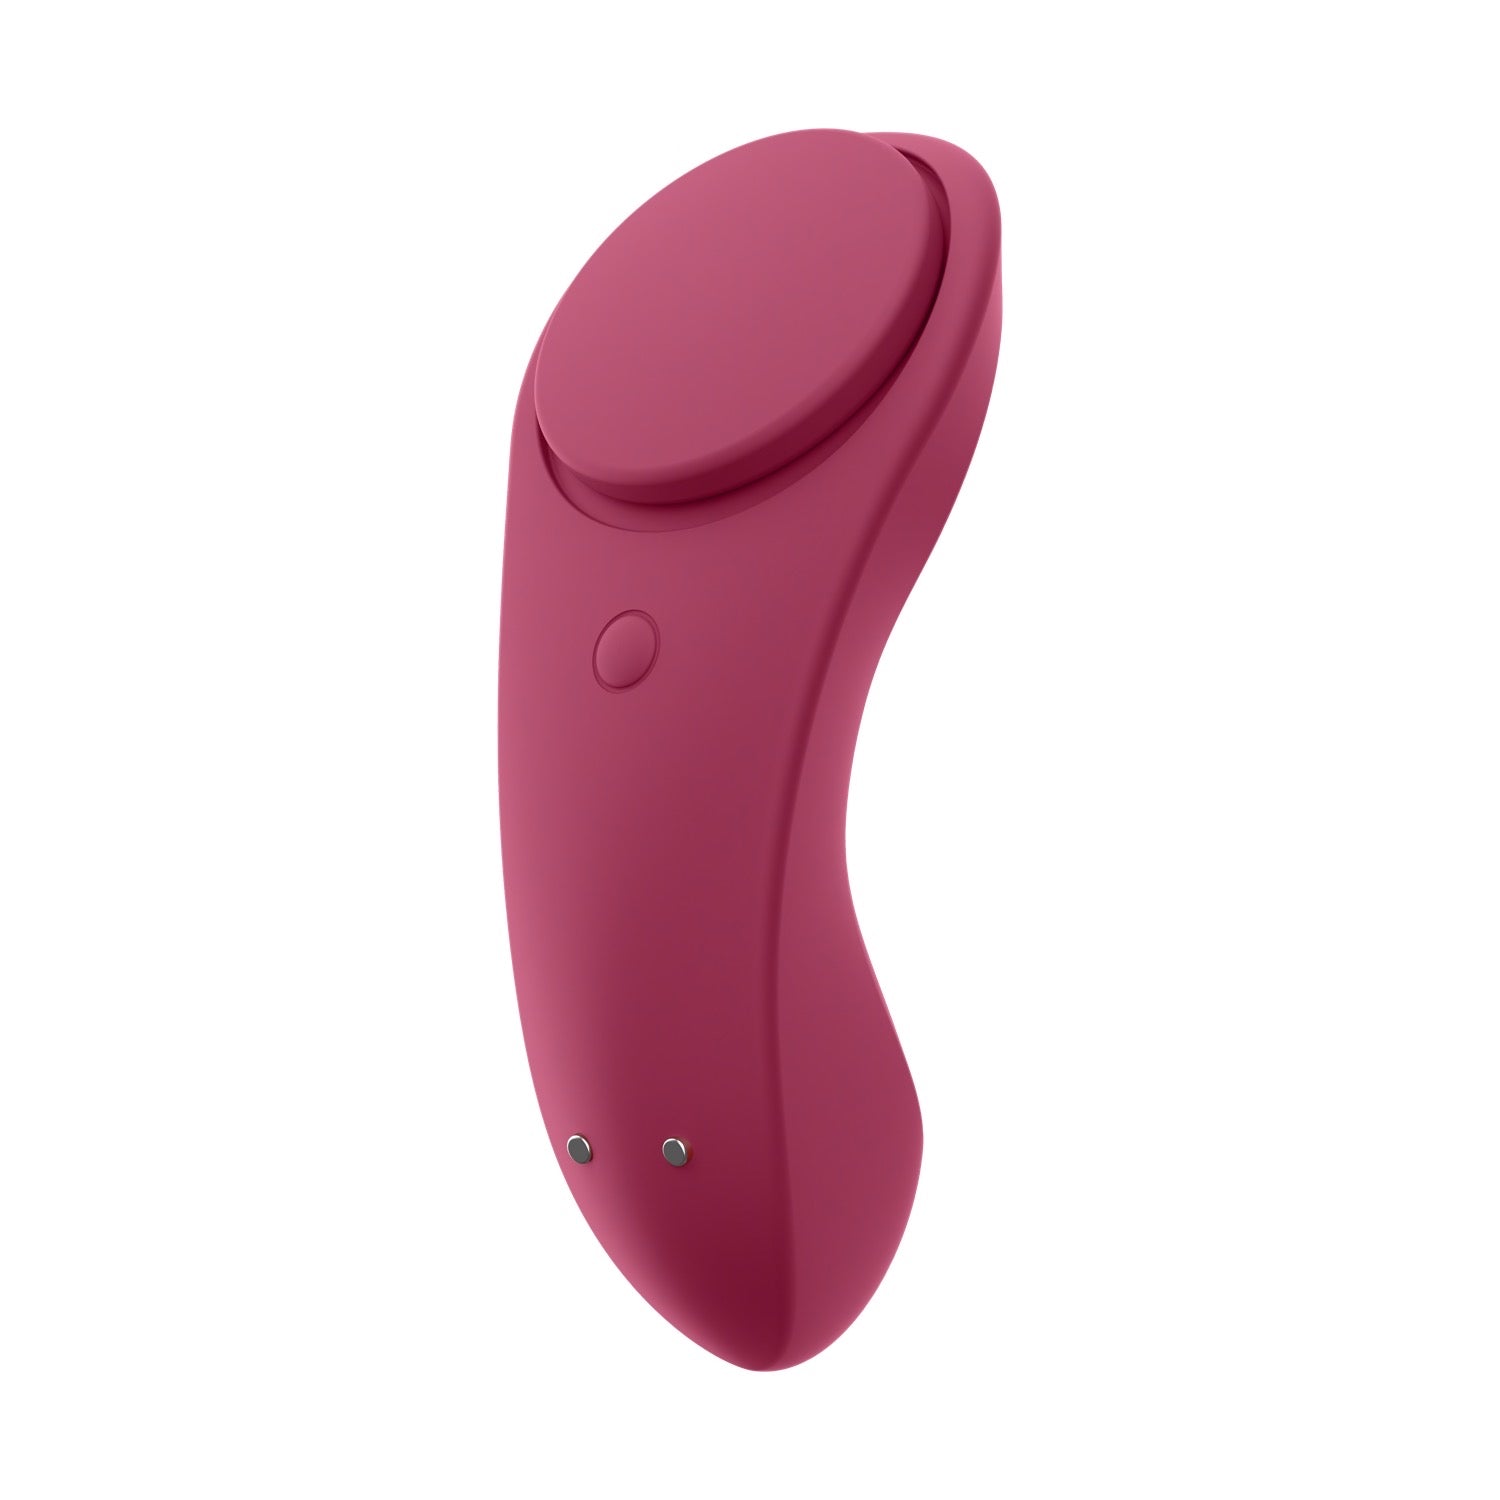 Satisfyer Sexy Secret - Red by Satisfyer